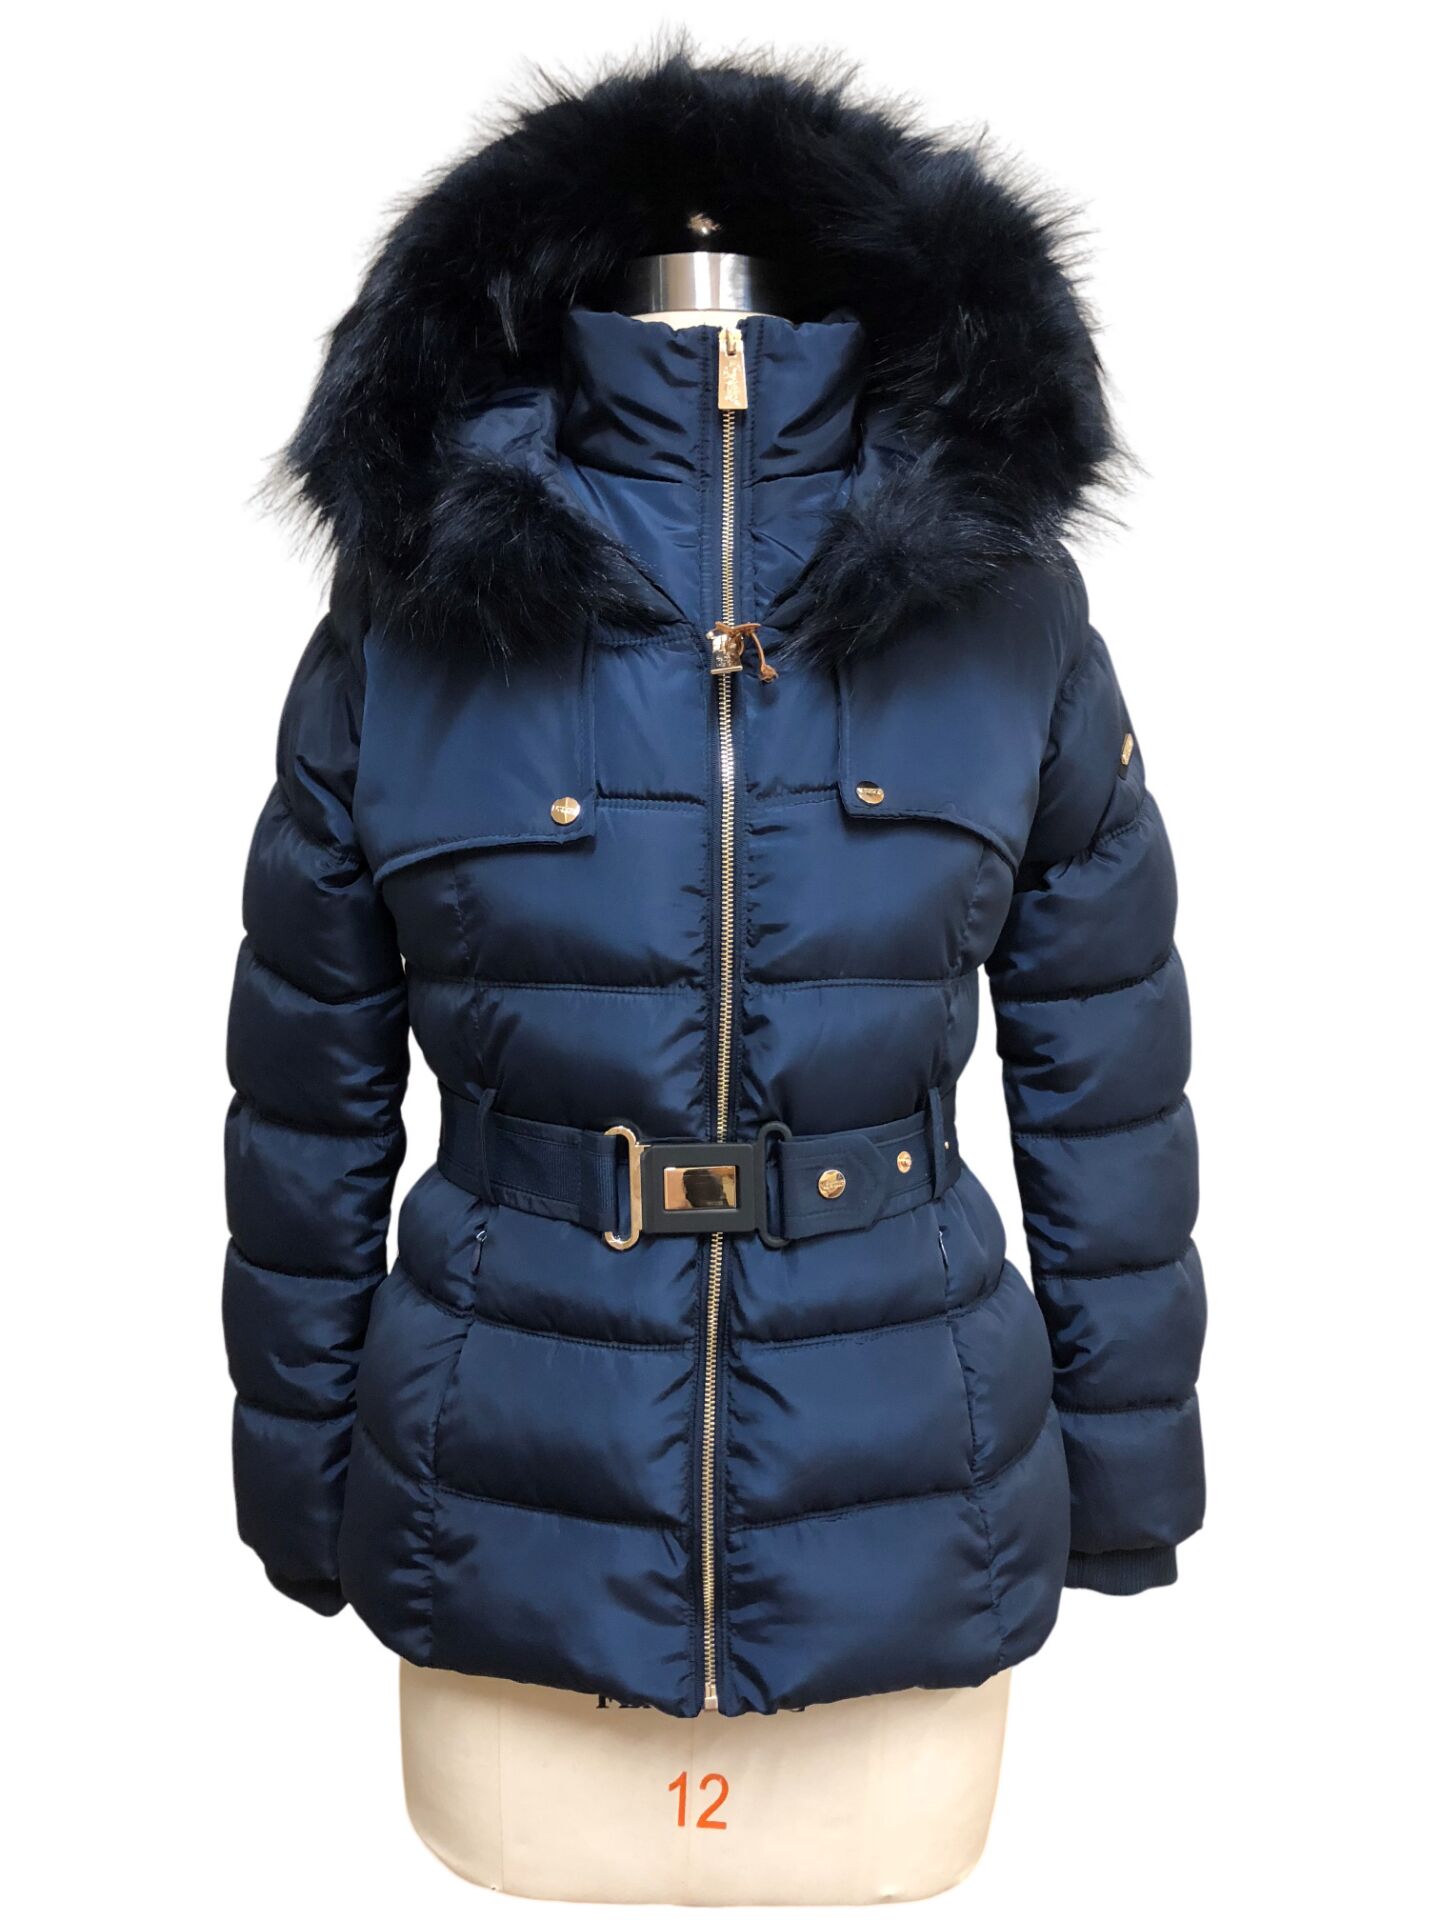 2022 New Design Heavy Padding Jacket Warm Casual Winter Puffer Jacket with Belt Chinese Supplier